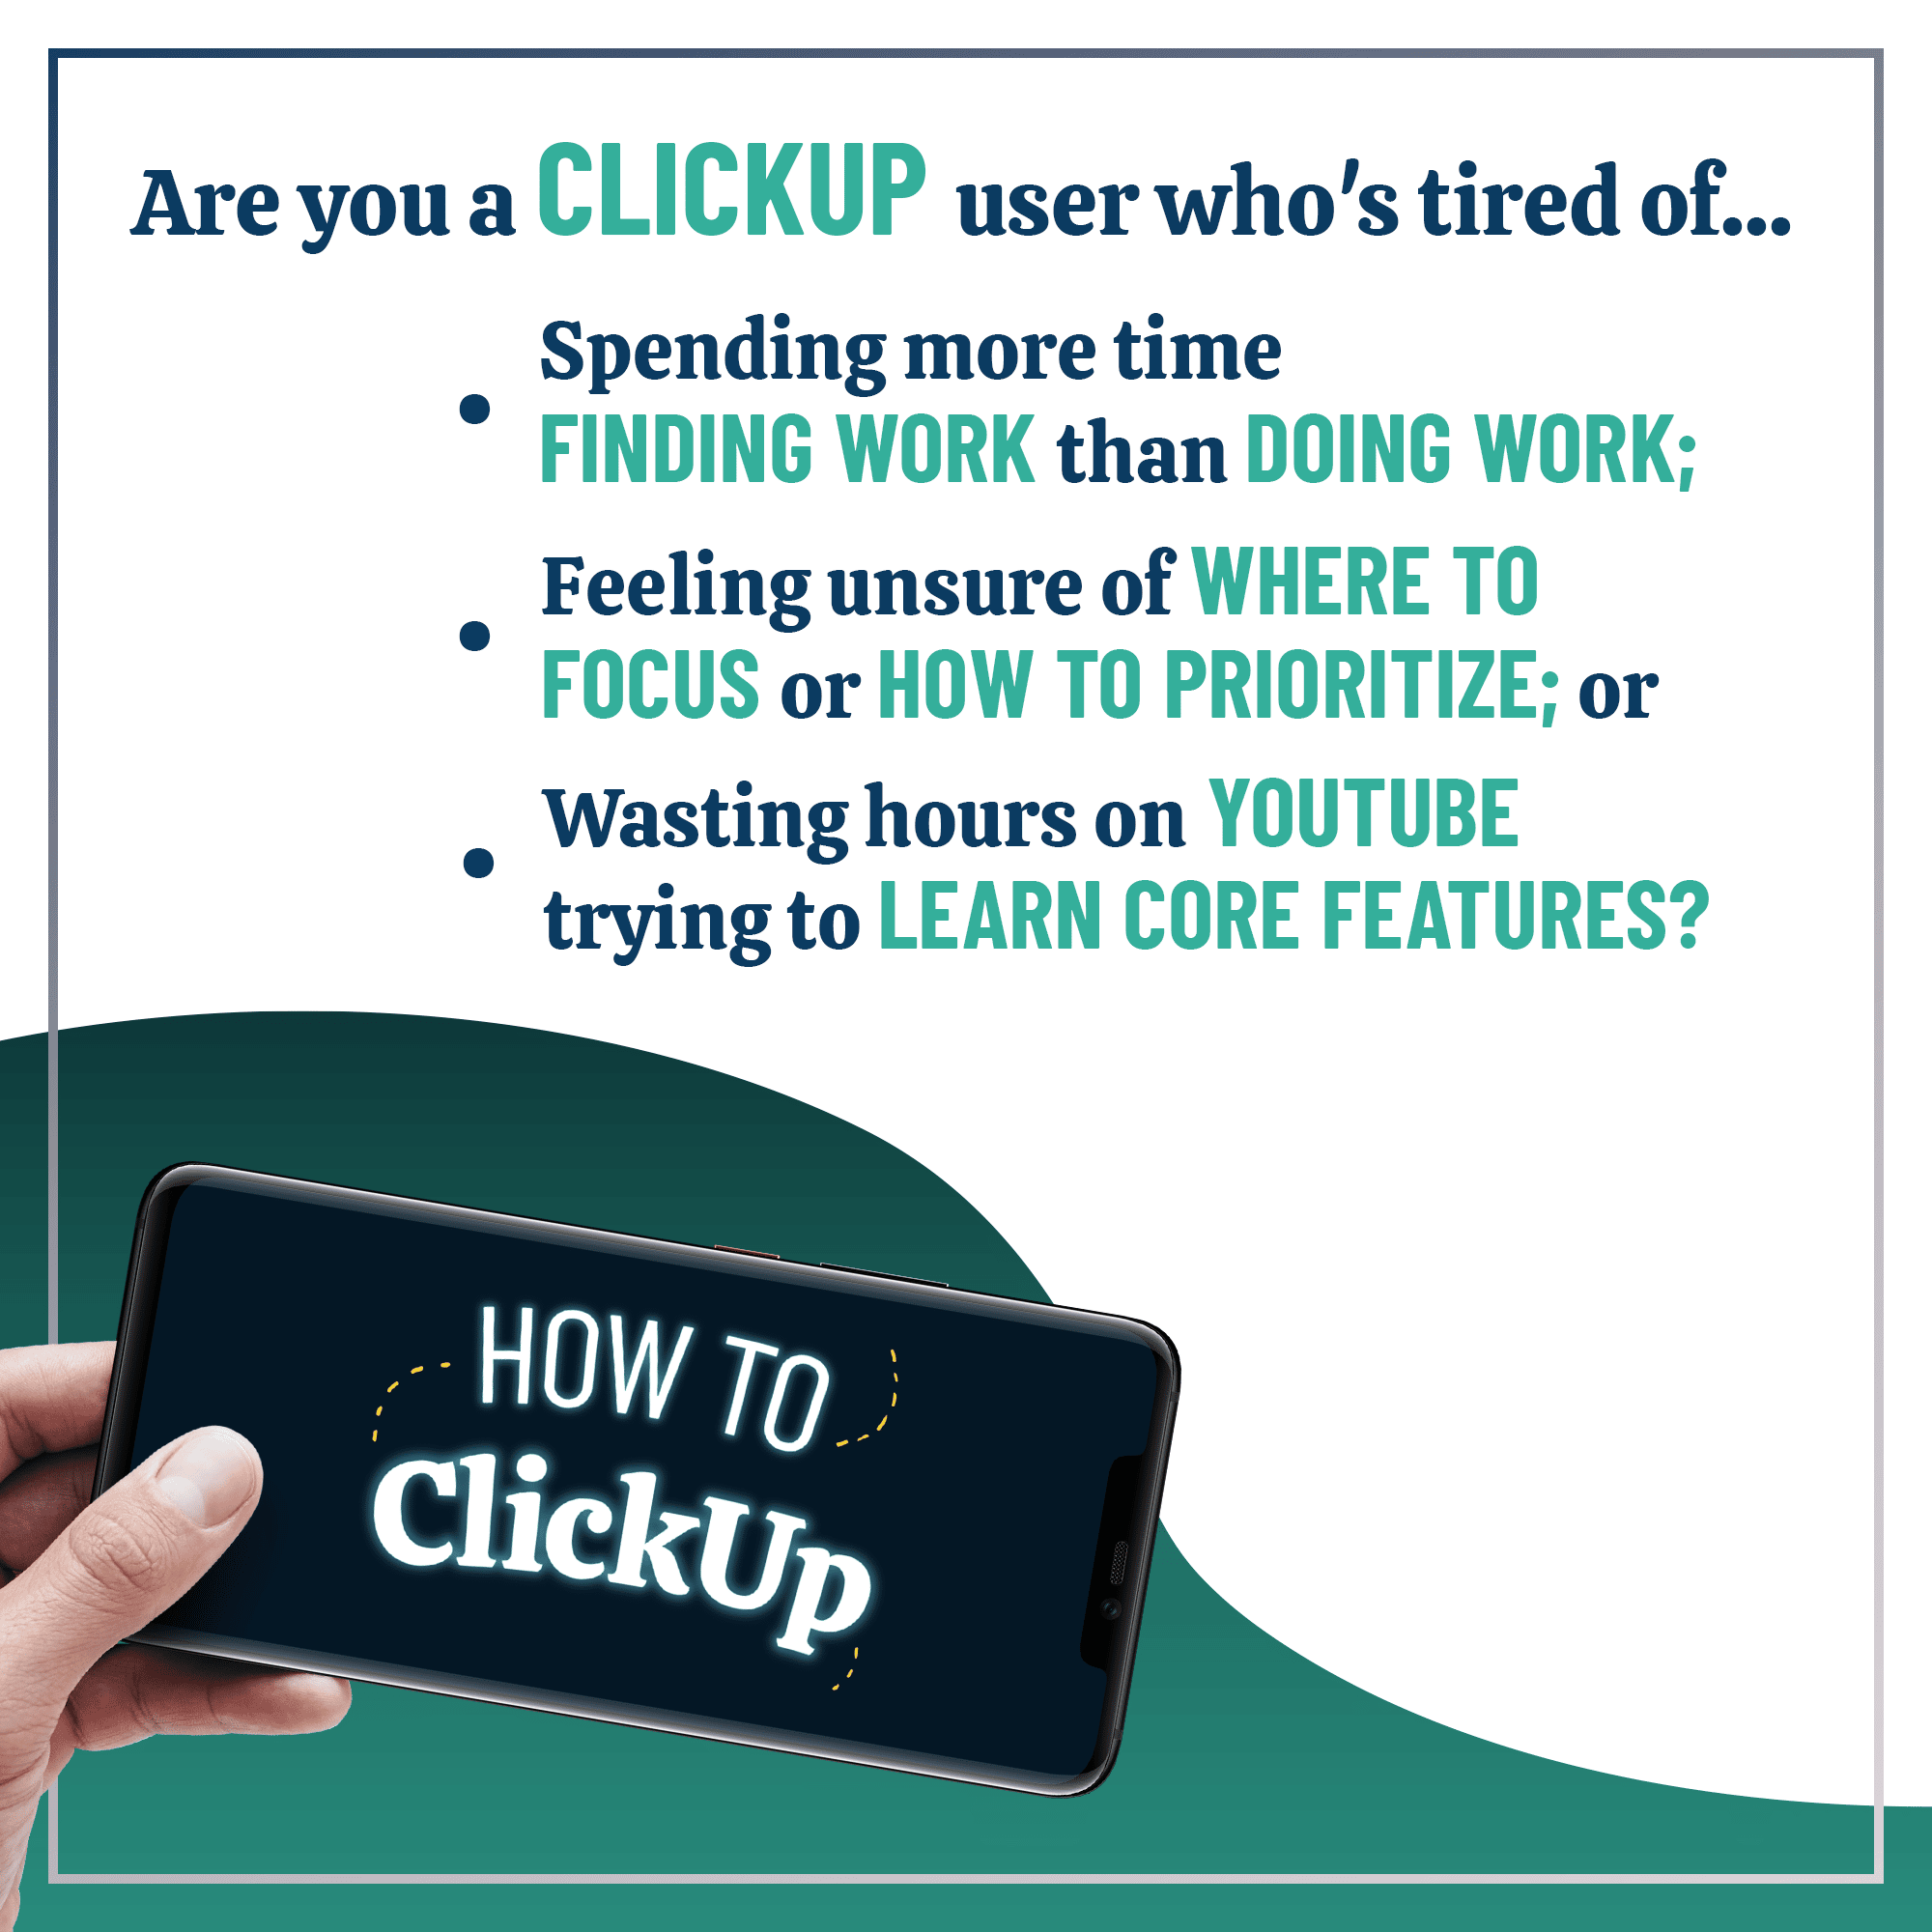 How to ClickUp Are you a clickup user who's tired of spending more time finding work than doing work. Enroll in How to CLick Up